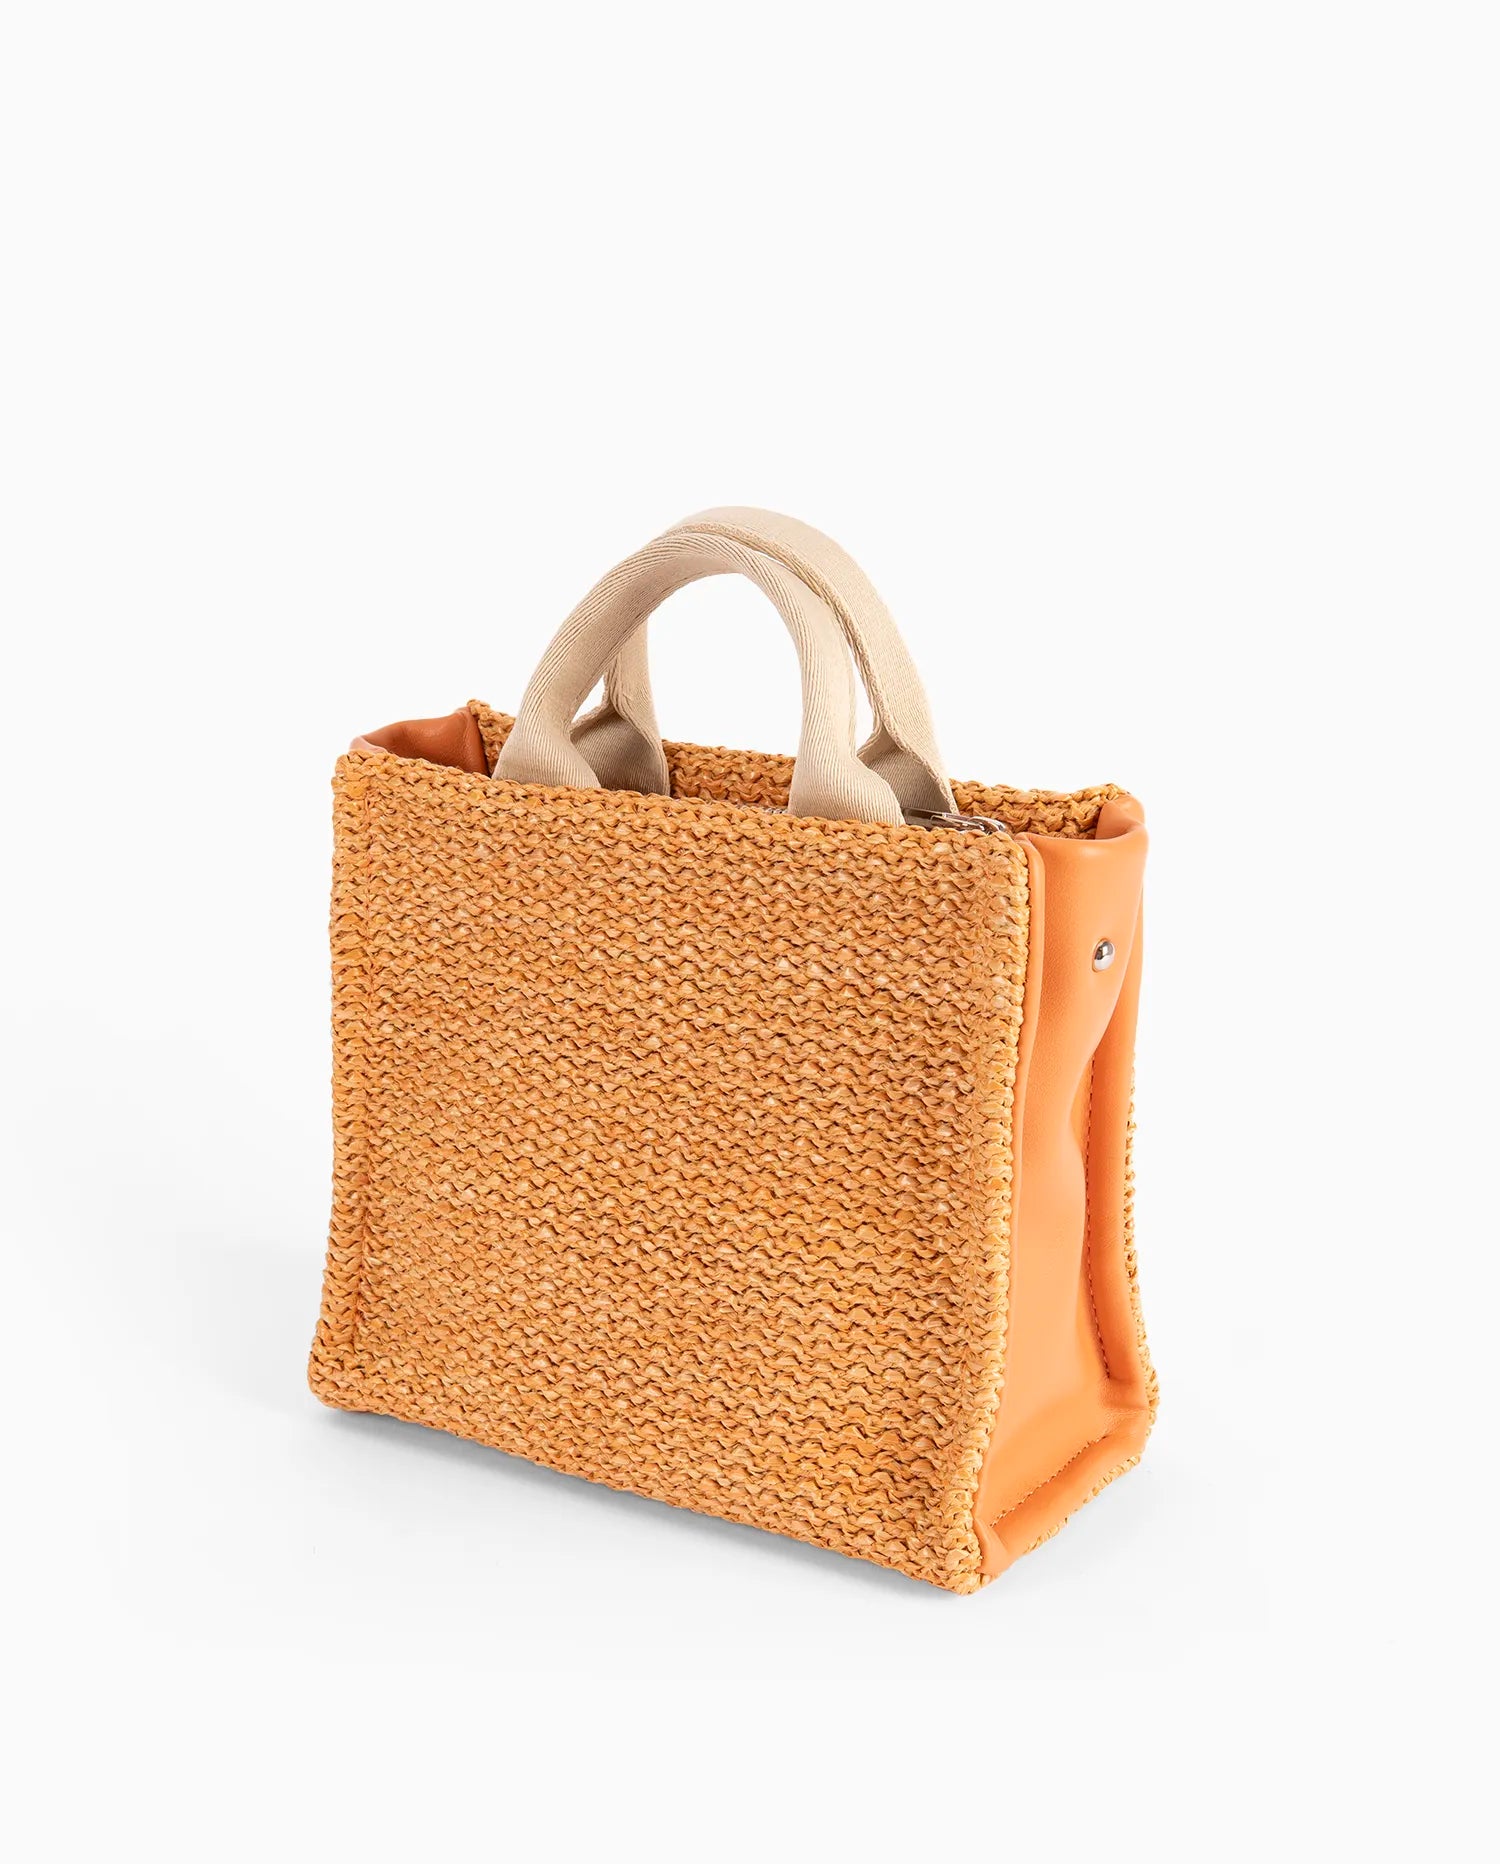  Spacious interior of Pepe Moll Wicker Crossbody Bag 241450, showing ample room for essentials.